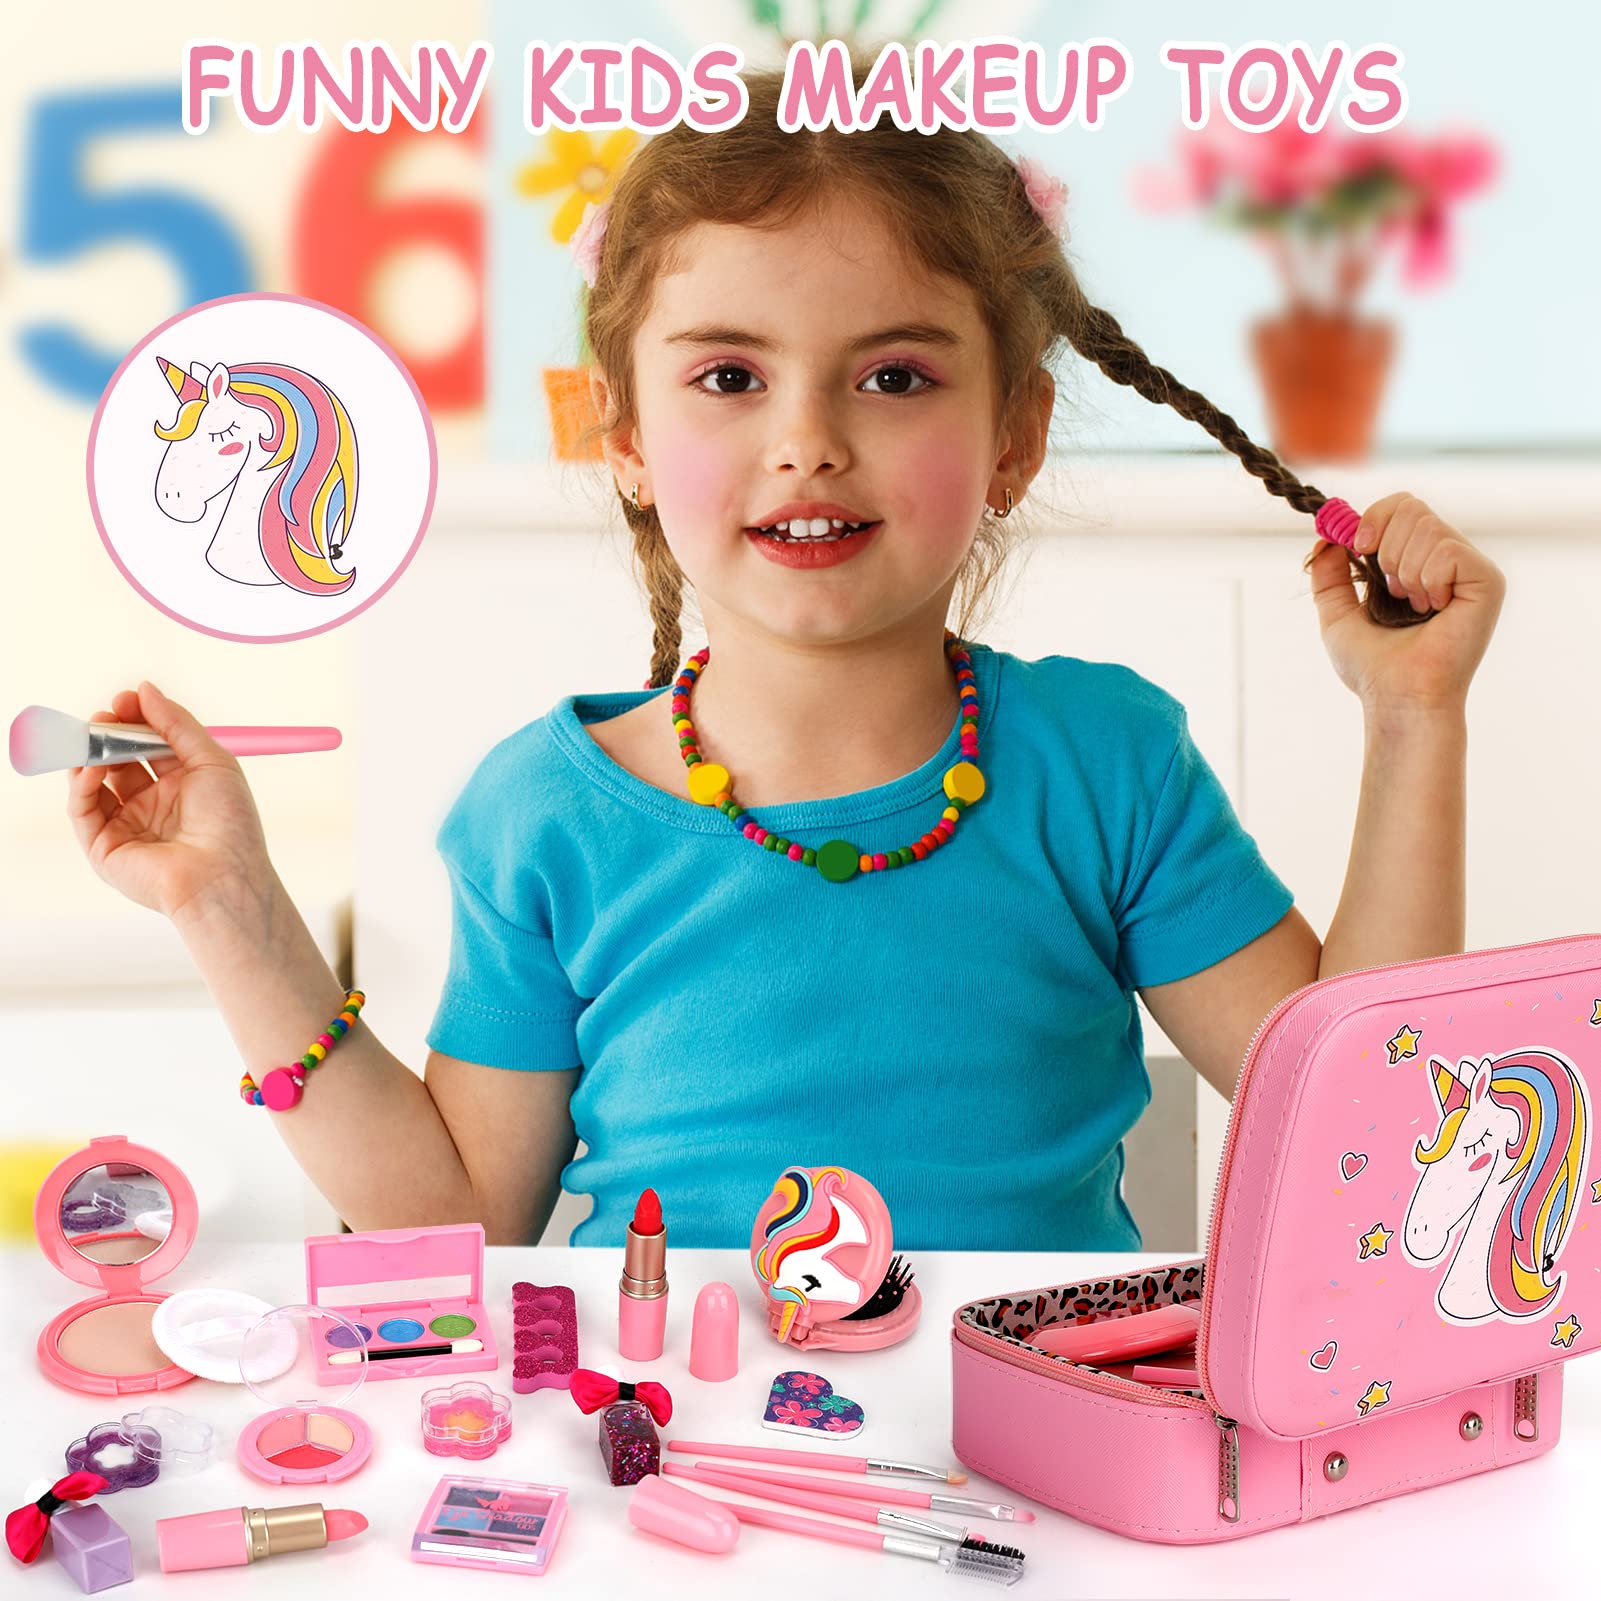 Kids Makeup Kit for Girls, Real Washable Makeup Set for Girls, Makeup for Kids, Girl Toys Princess Children Play Makeup Kit with Cosmetic Case Christmas Birthday Gifts for 4 5 6 7 8 Years Old Girls